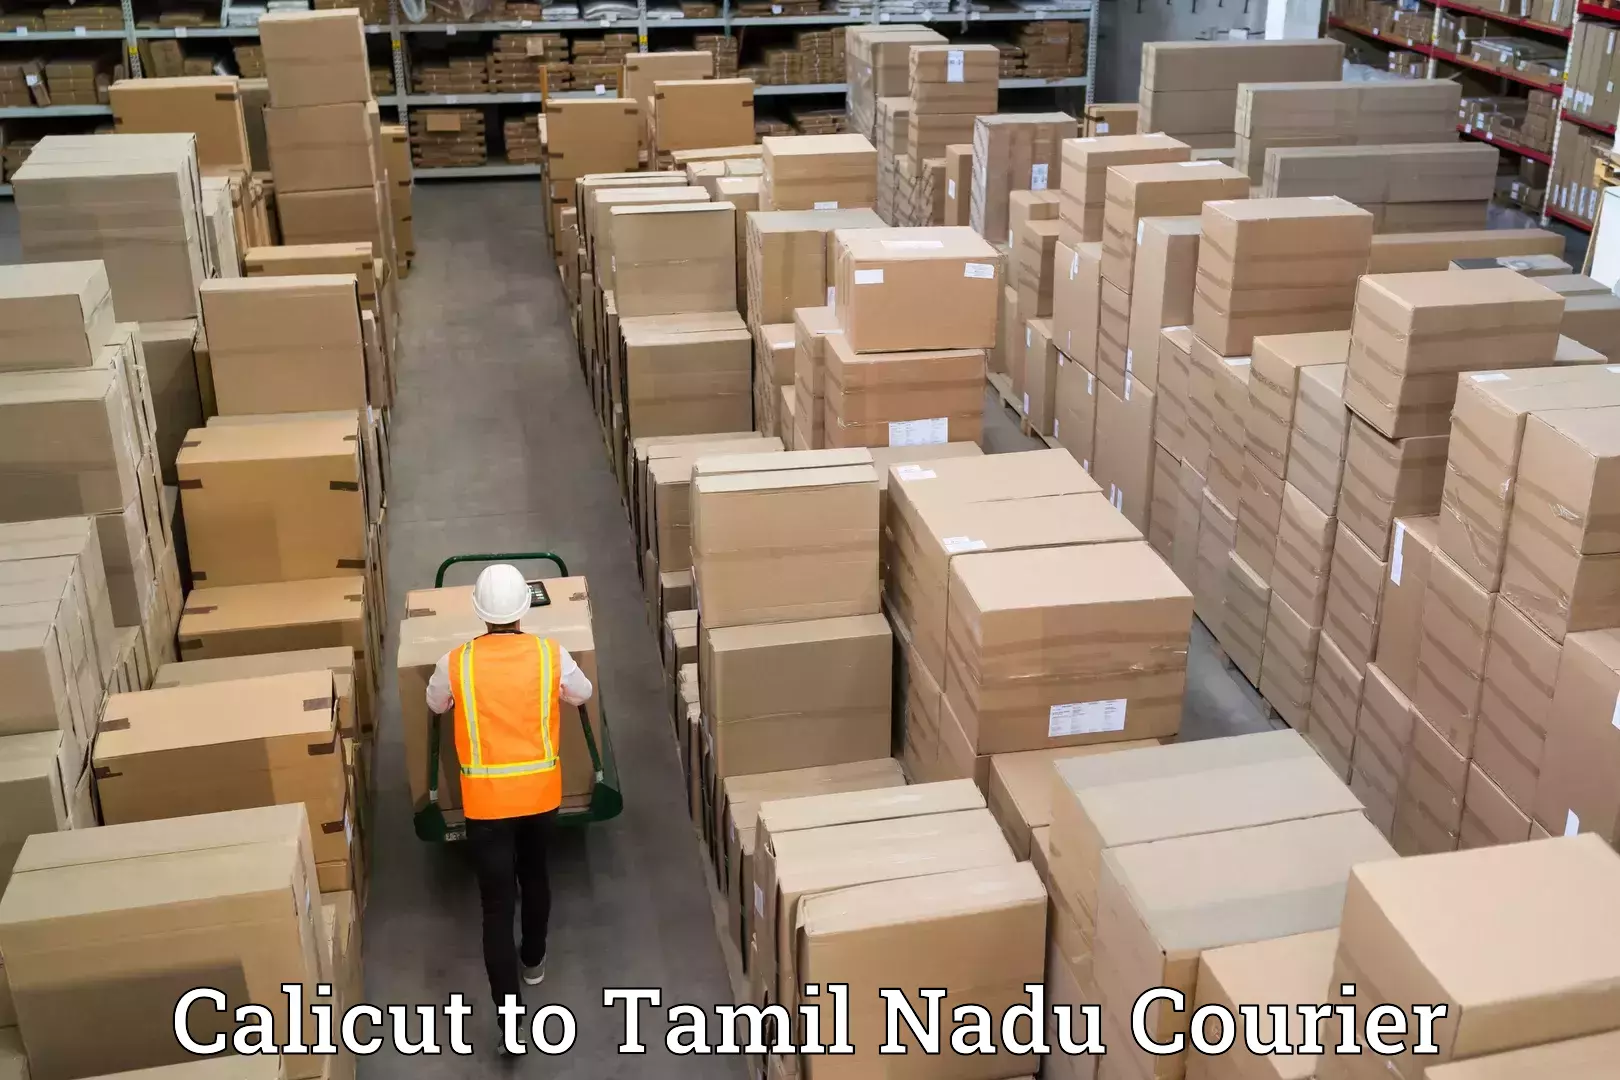 Trusted relocation experts Calicut to Tamil Nadu